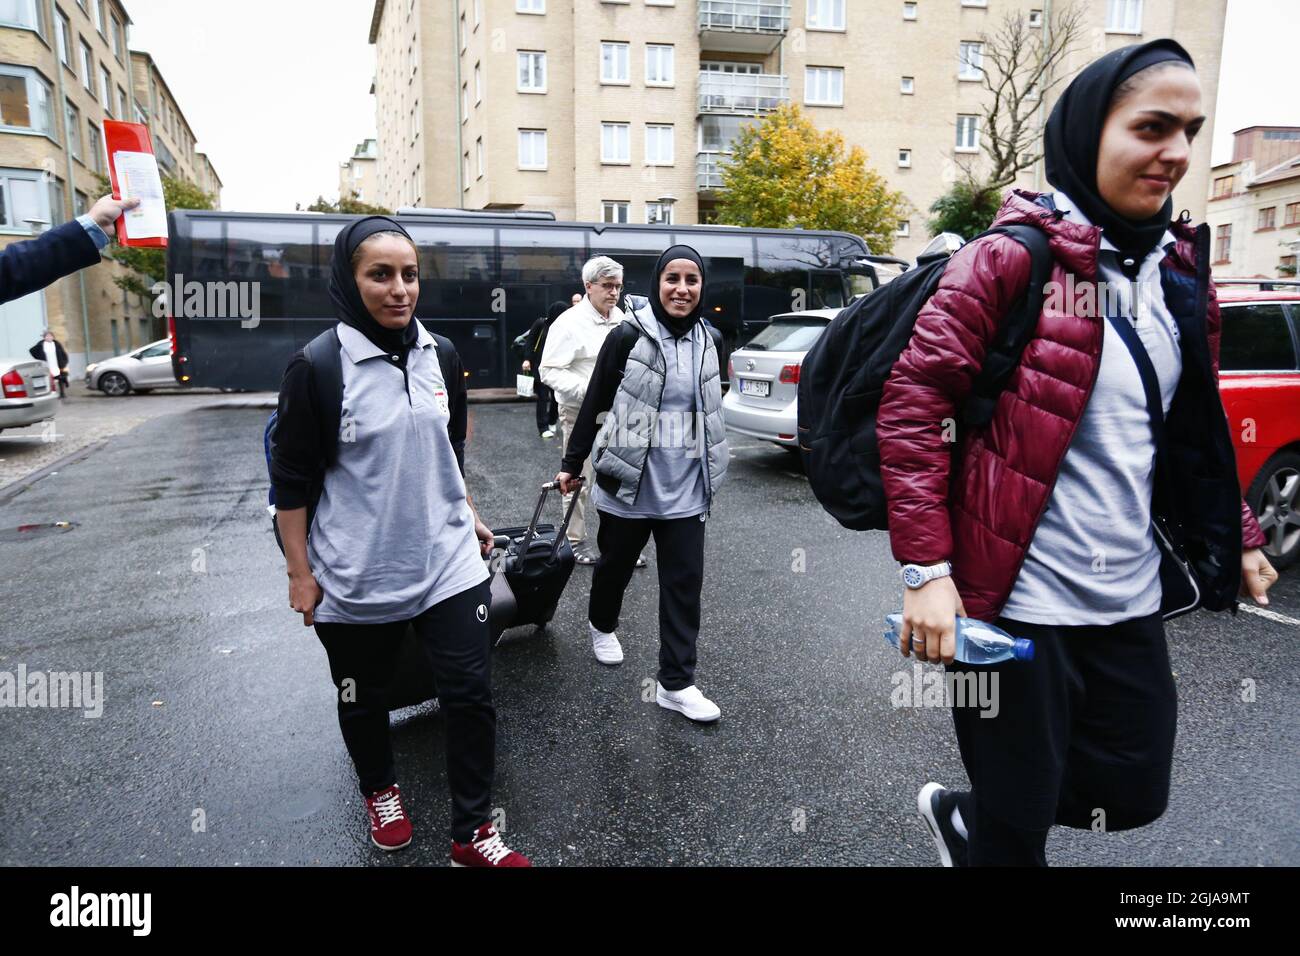 The Iranian women's national soccer team arrive at their hotel in Gothenburg, Sweden, on Oct. 20, 2016, on the eve of their international friendly soccer match against Sweden. Friday's match will be the first ever in Europe for the team. The match was planned for Oct. 20, but was postponed one day due to visa reasons. Photo: Thomas Johansson / TT / code 9200 Stock Photo